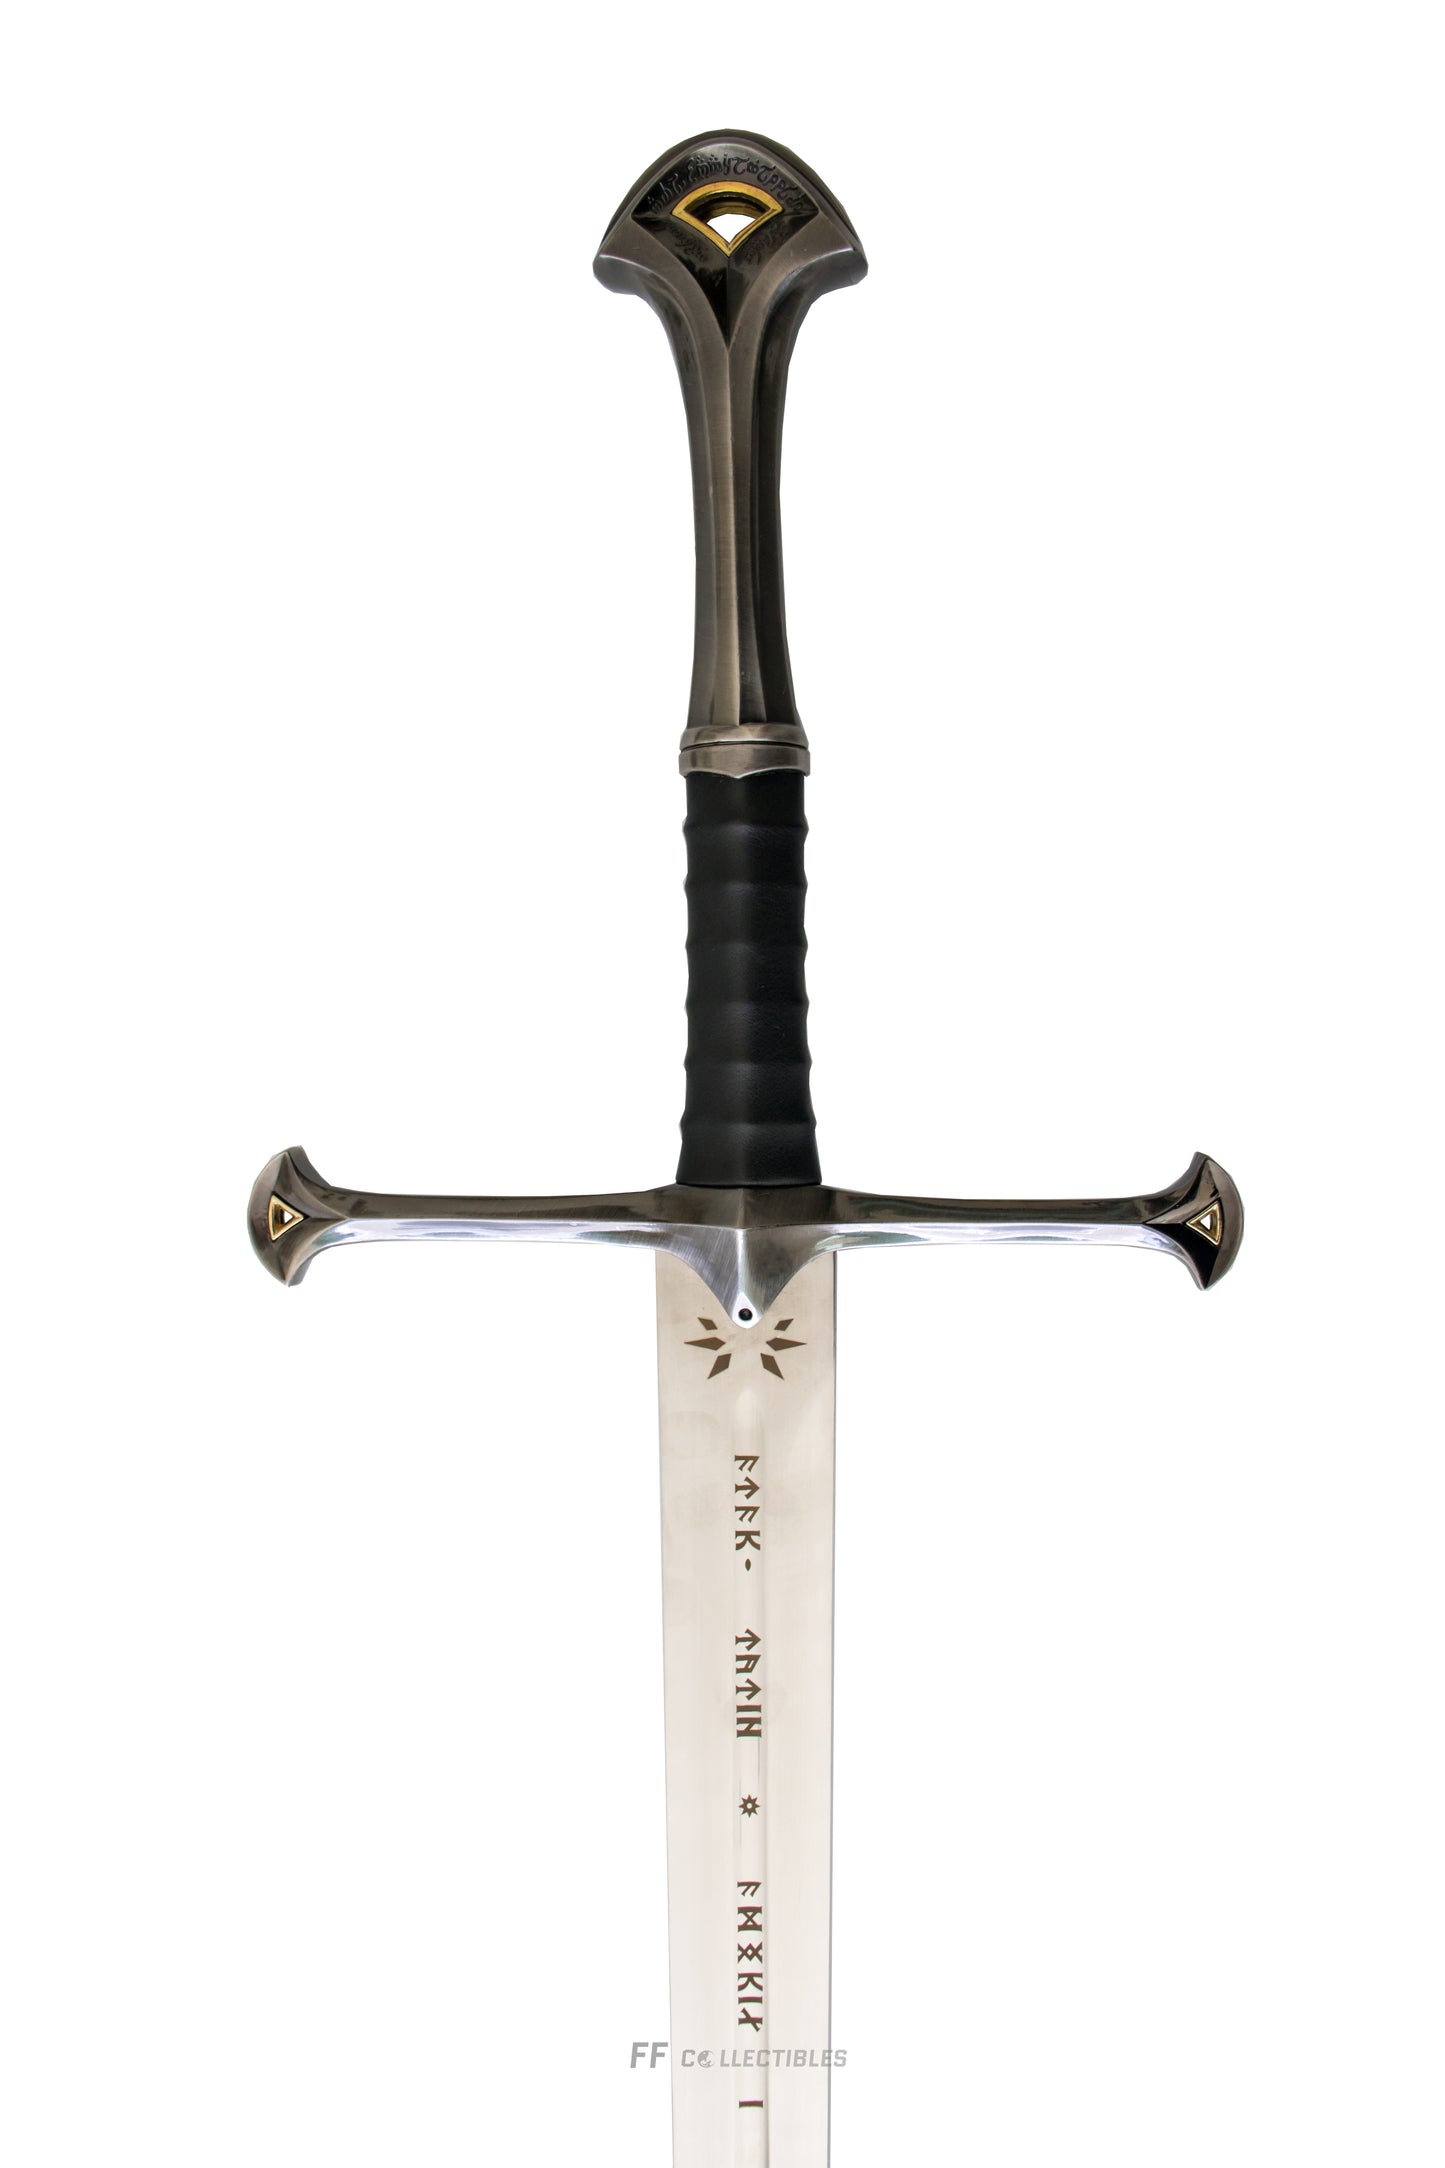 LORD OF THE RINGS- ANDURIL, FLAME OF THE WEST, SWORD OF ARAGORN (FREE stand inc)